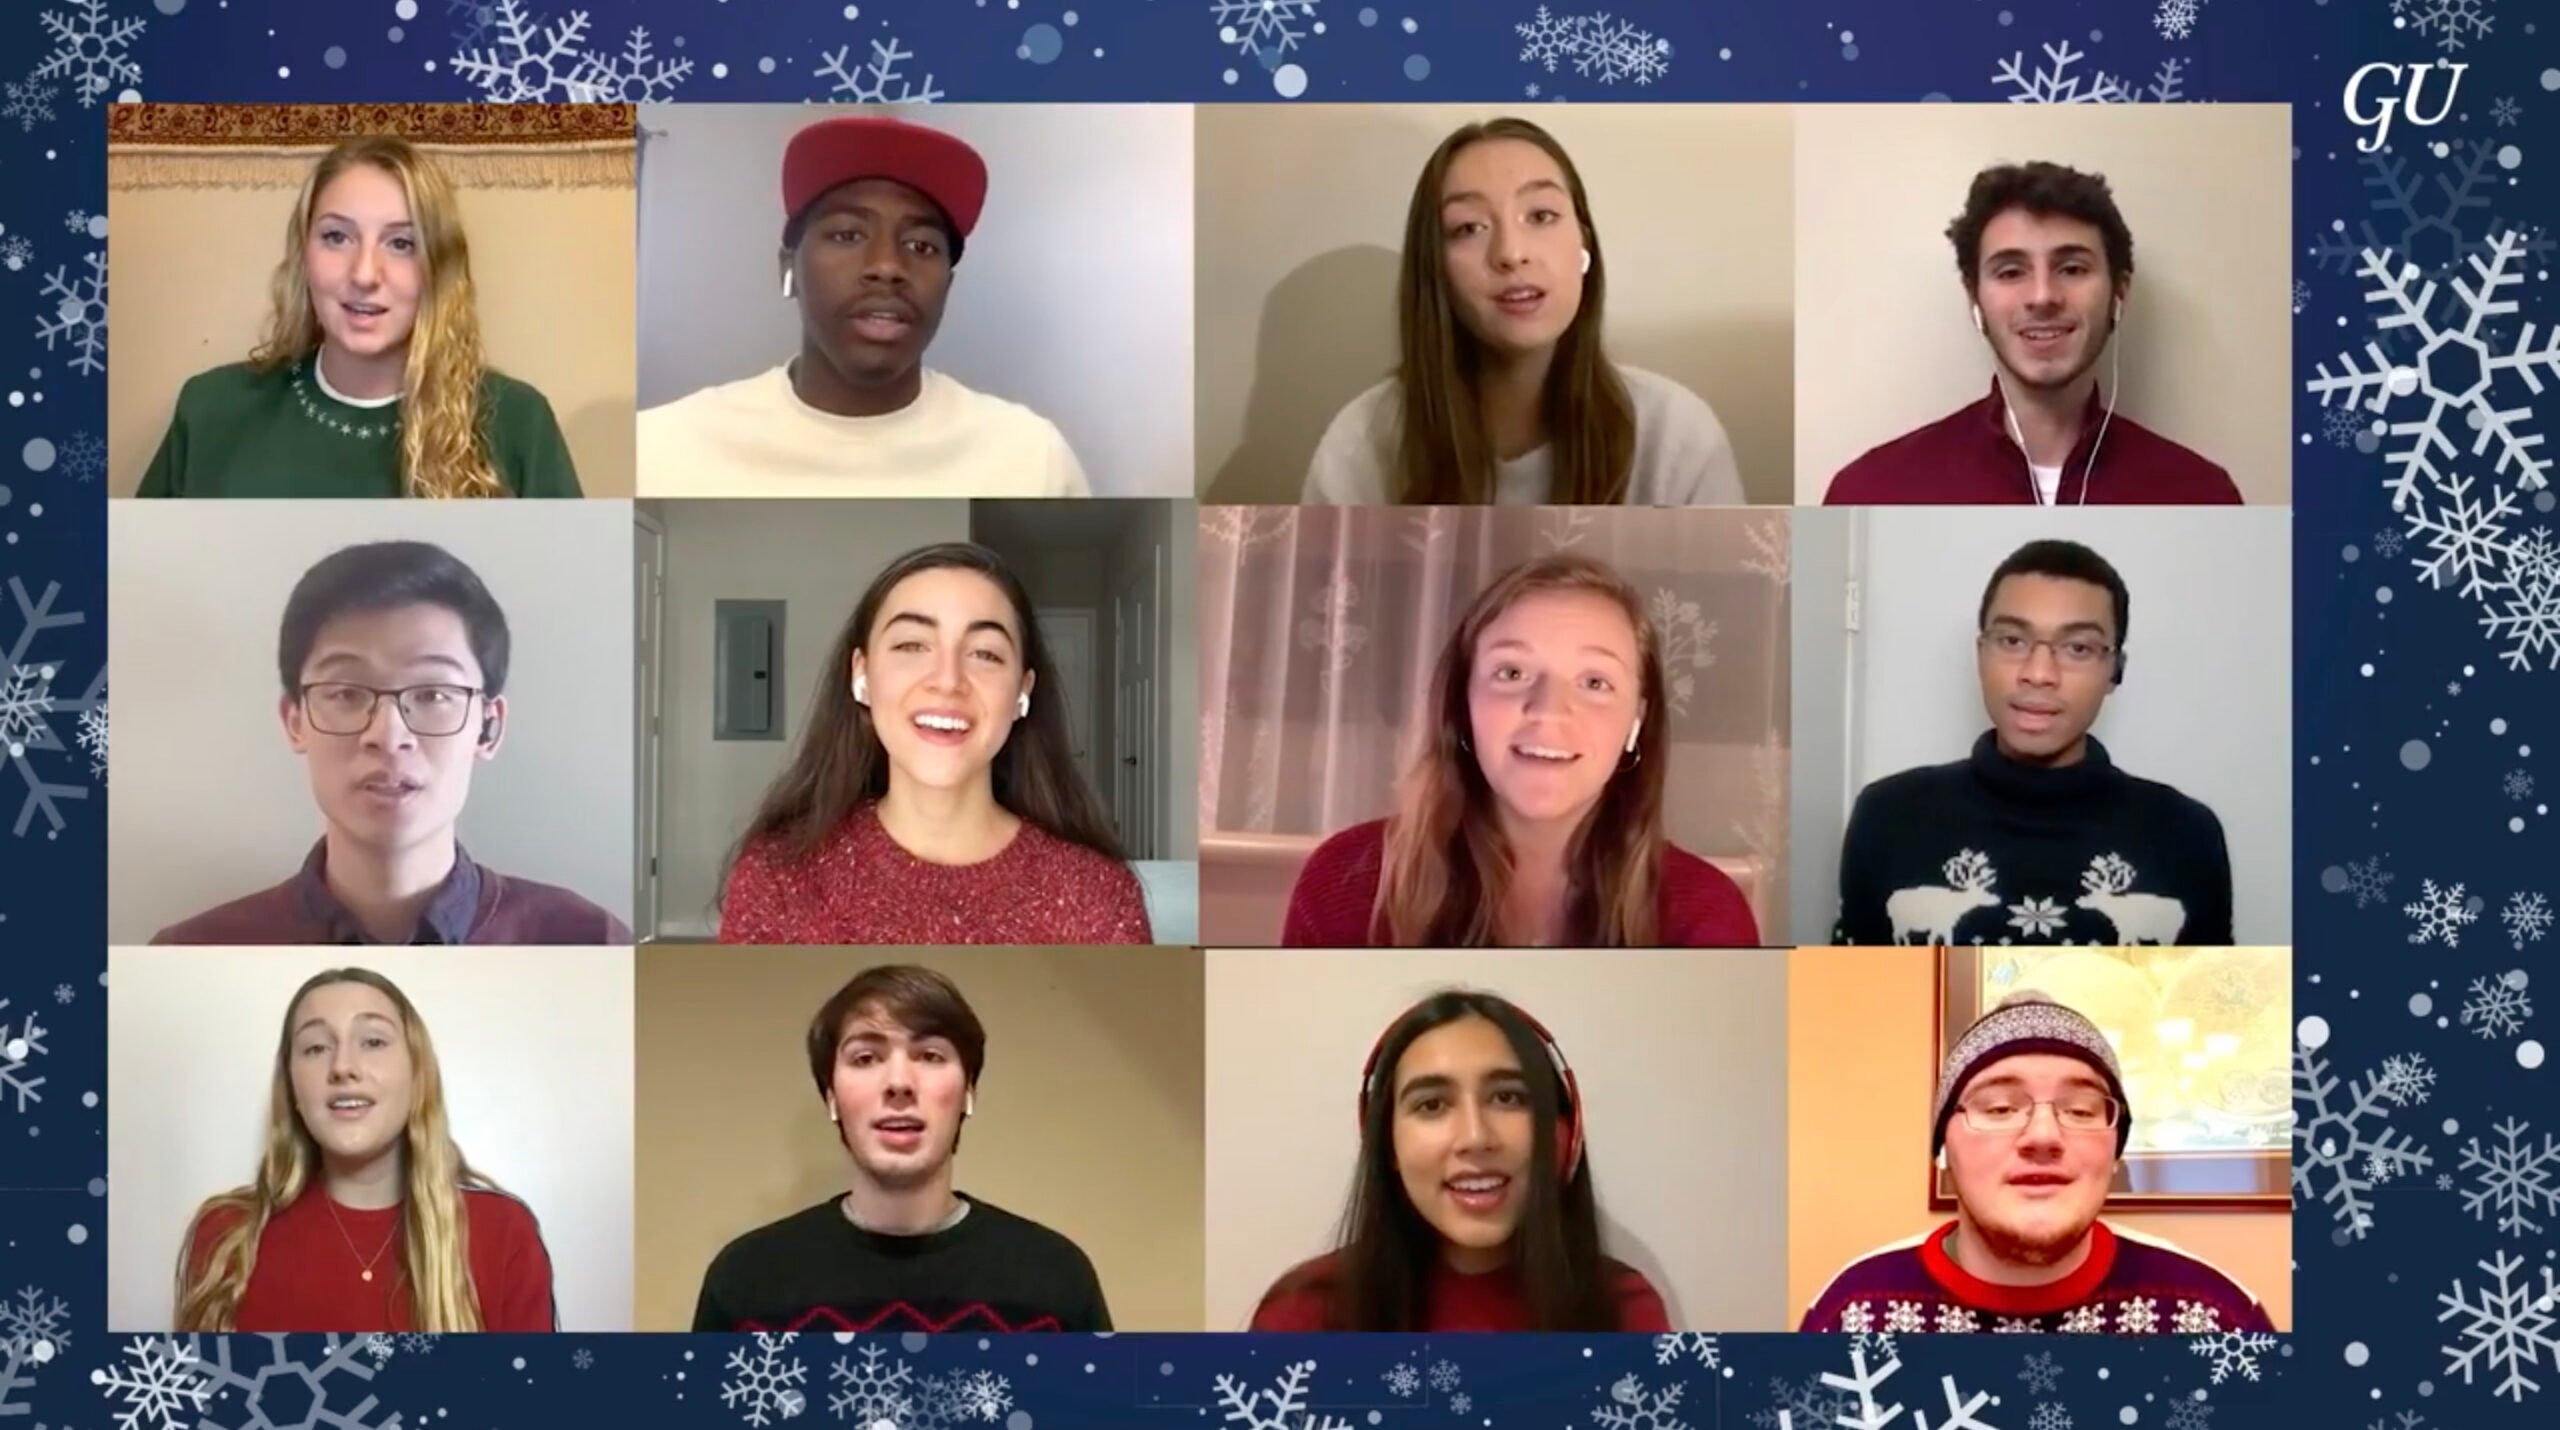 Georgetown University a cappella group performs as part of the 2020 virtual tree lighting.